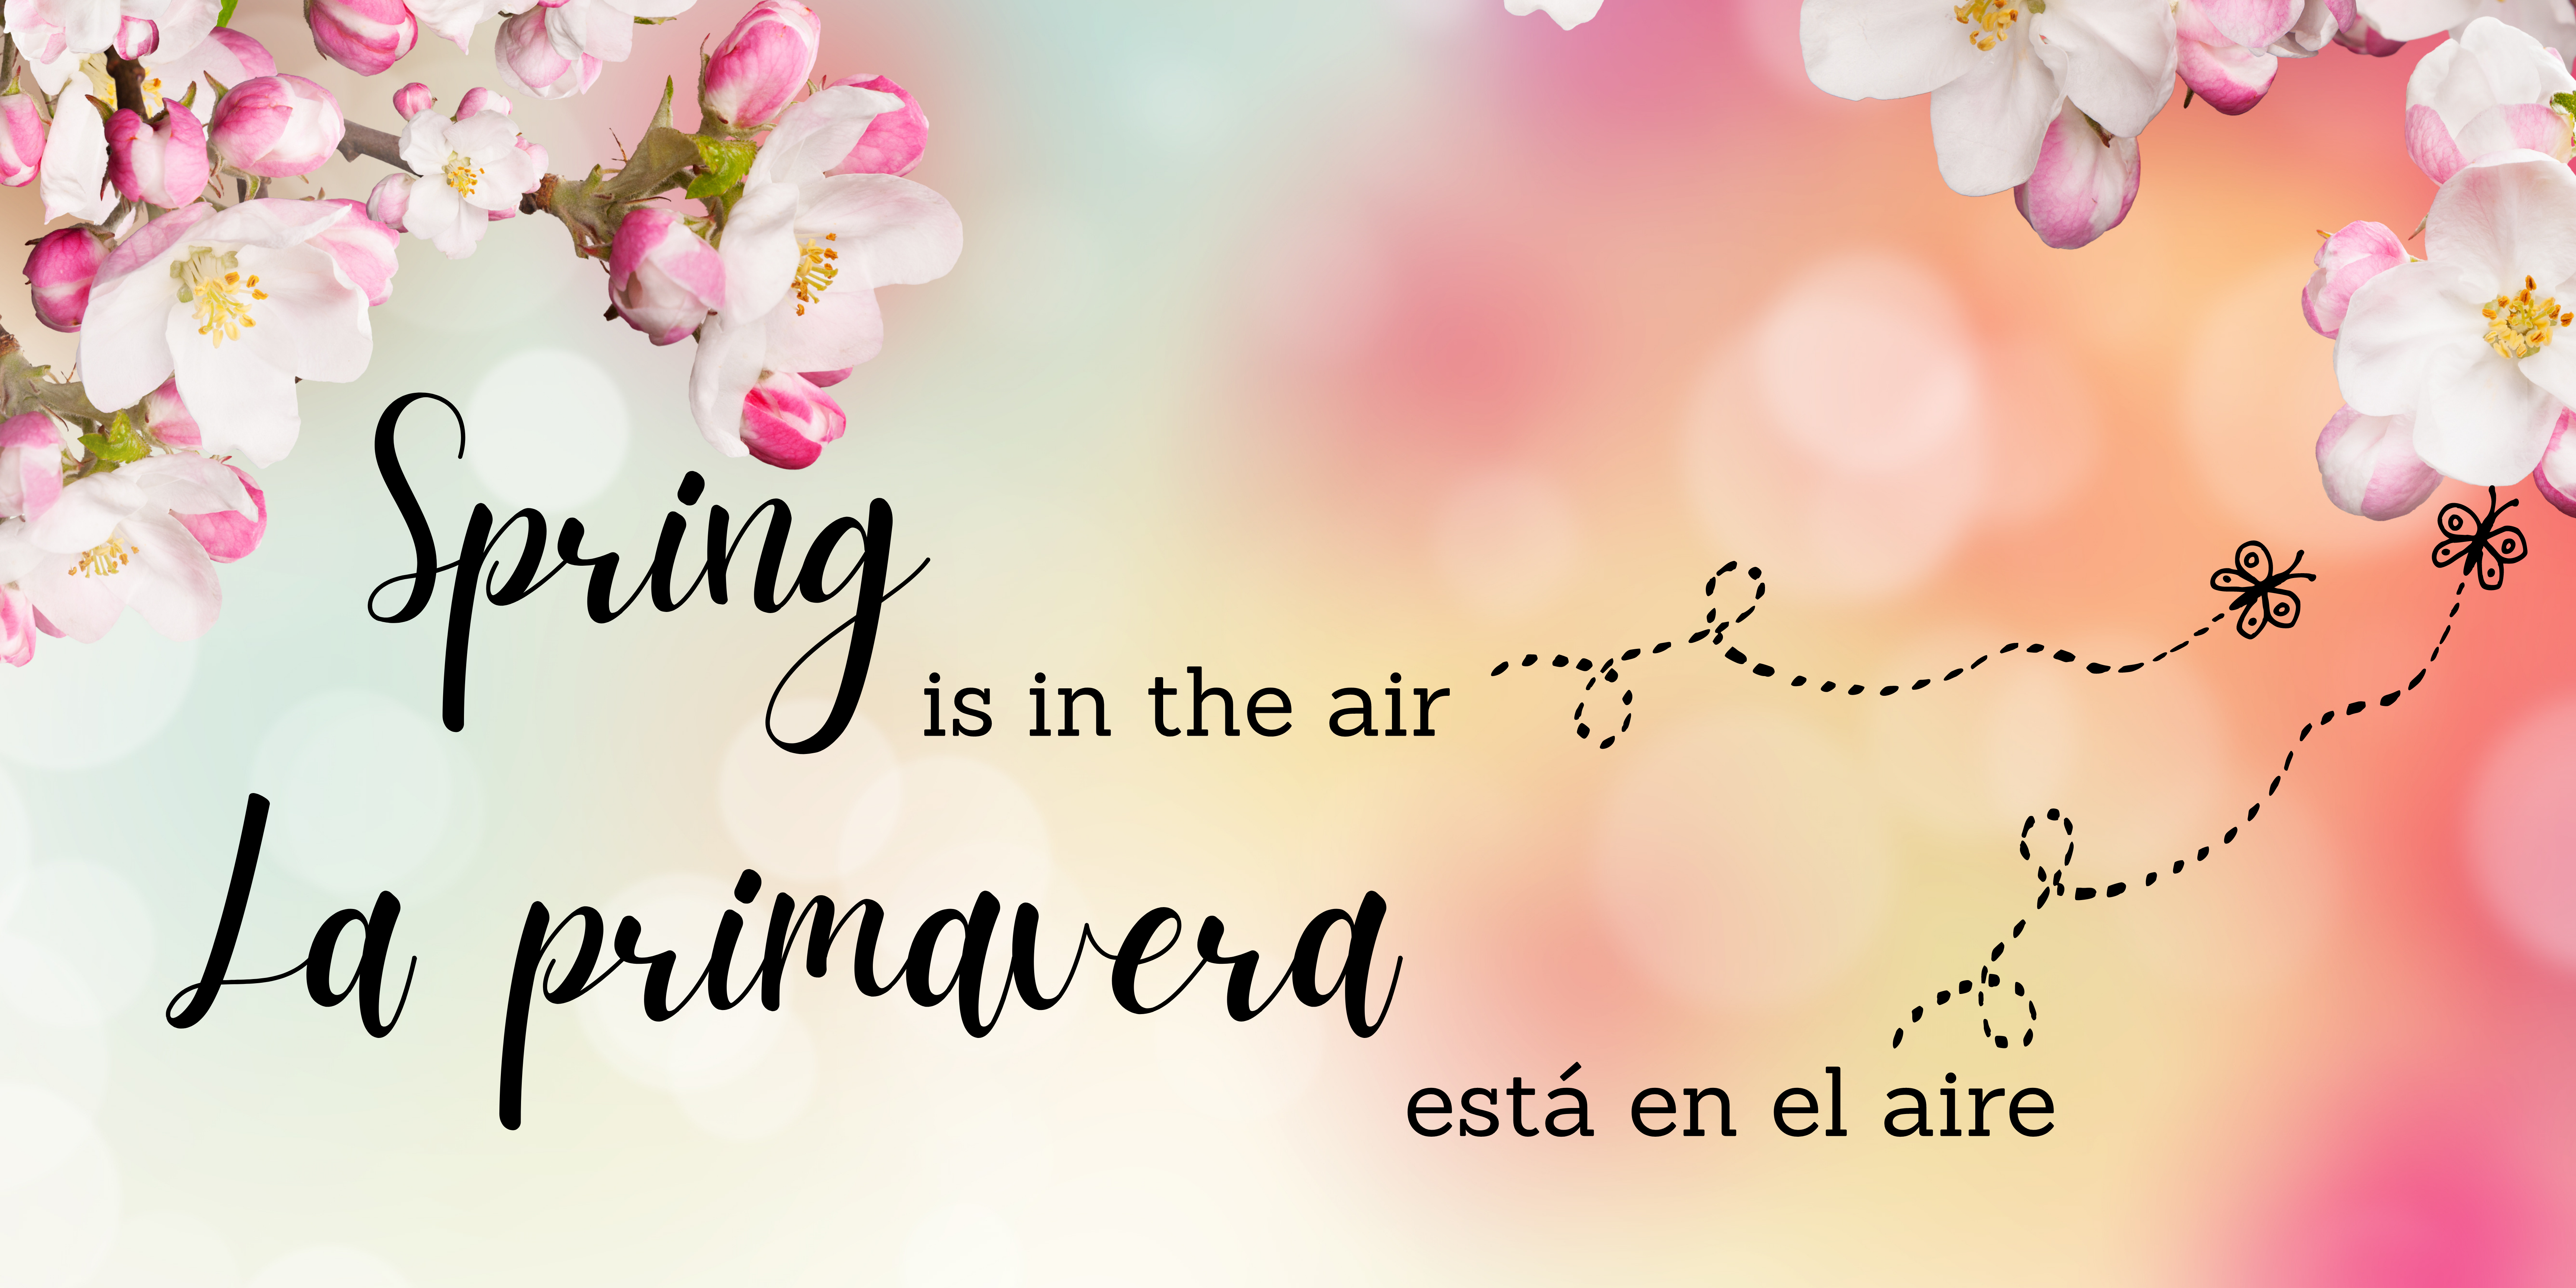 Black text on pastel background with images of cherry blossoms says, "Spring is in the air" and "La primavera está en el aire"